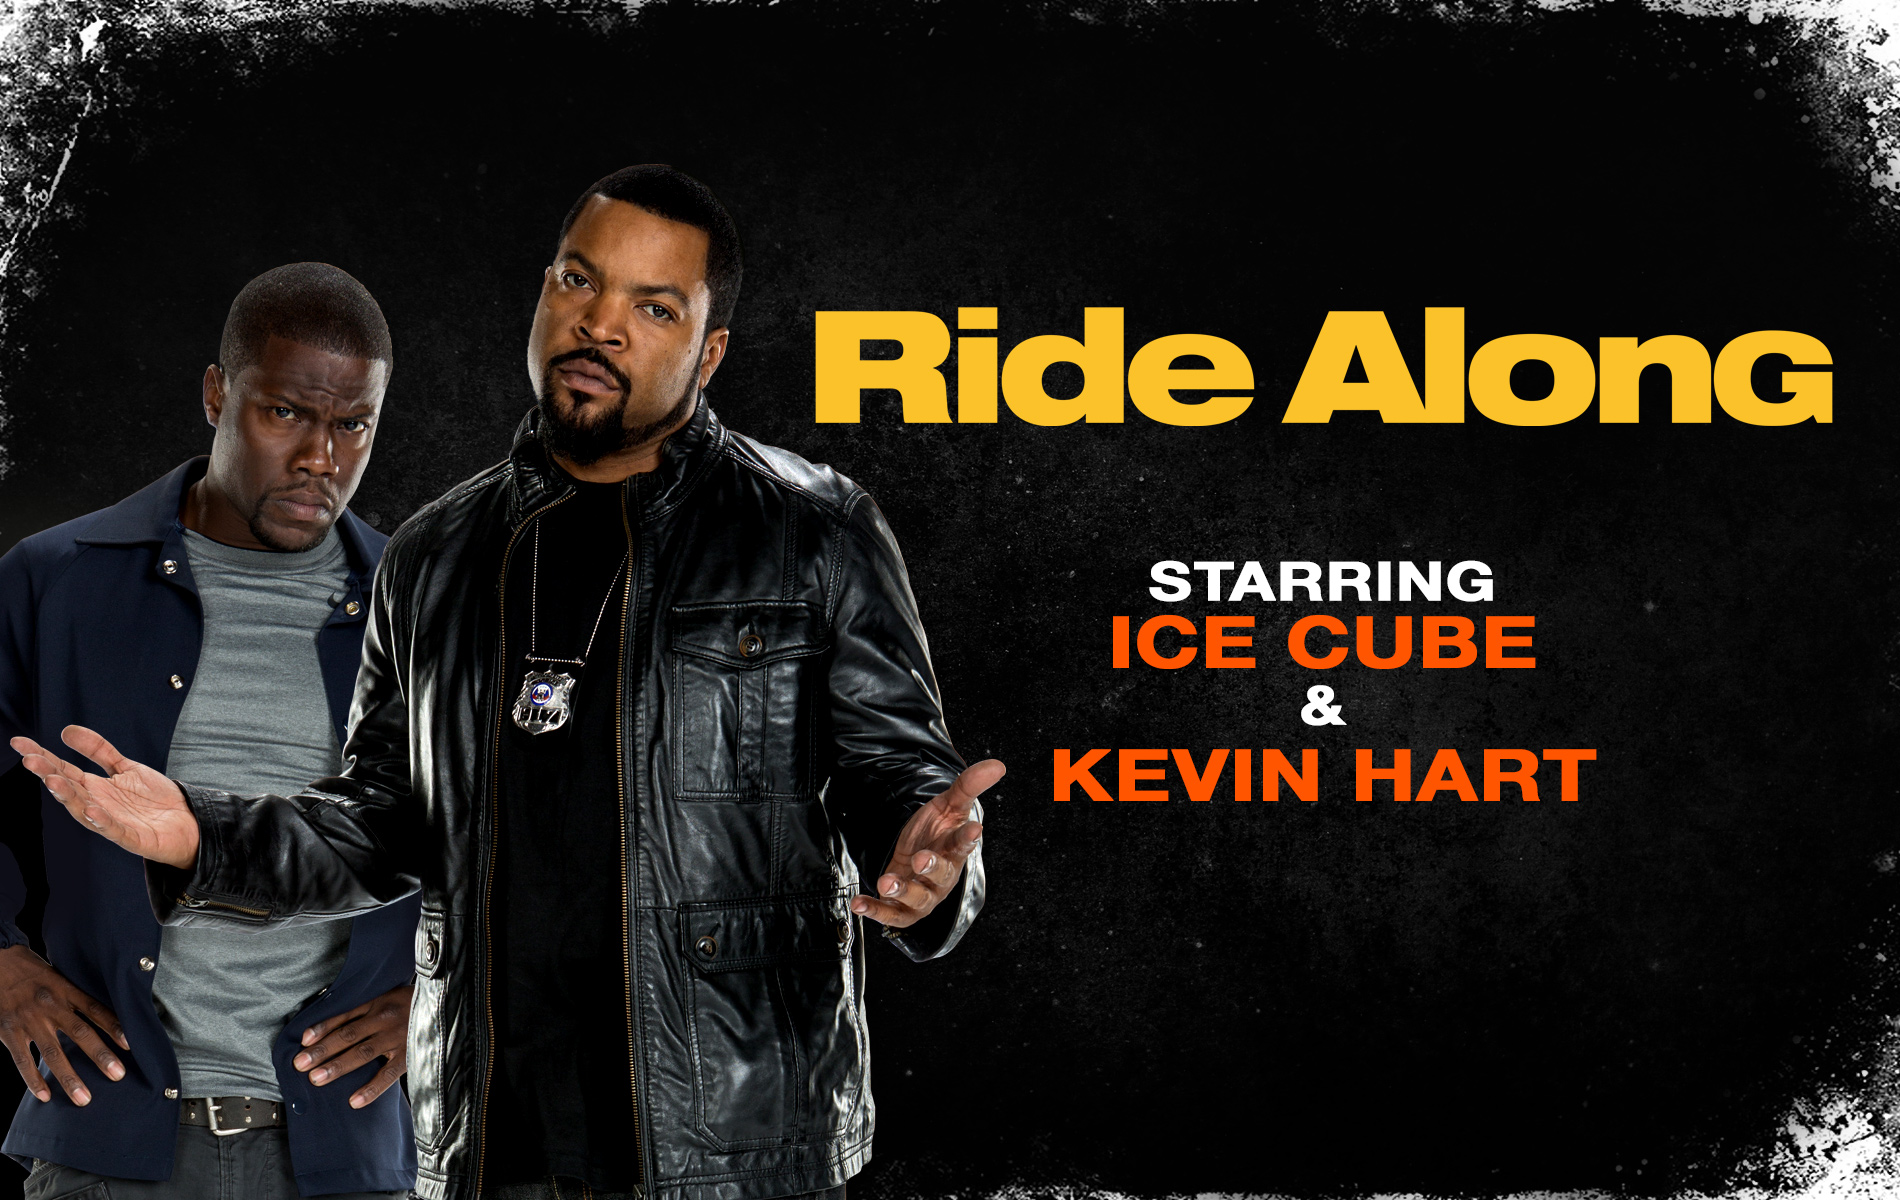 movie, ride along, cop, ice cube (celebrity), kevin hart, police